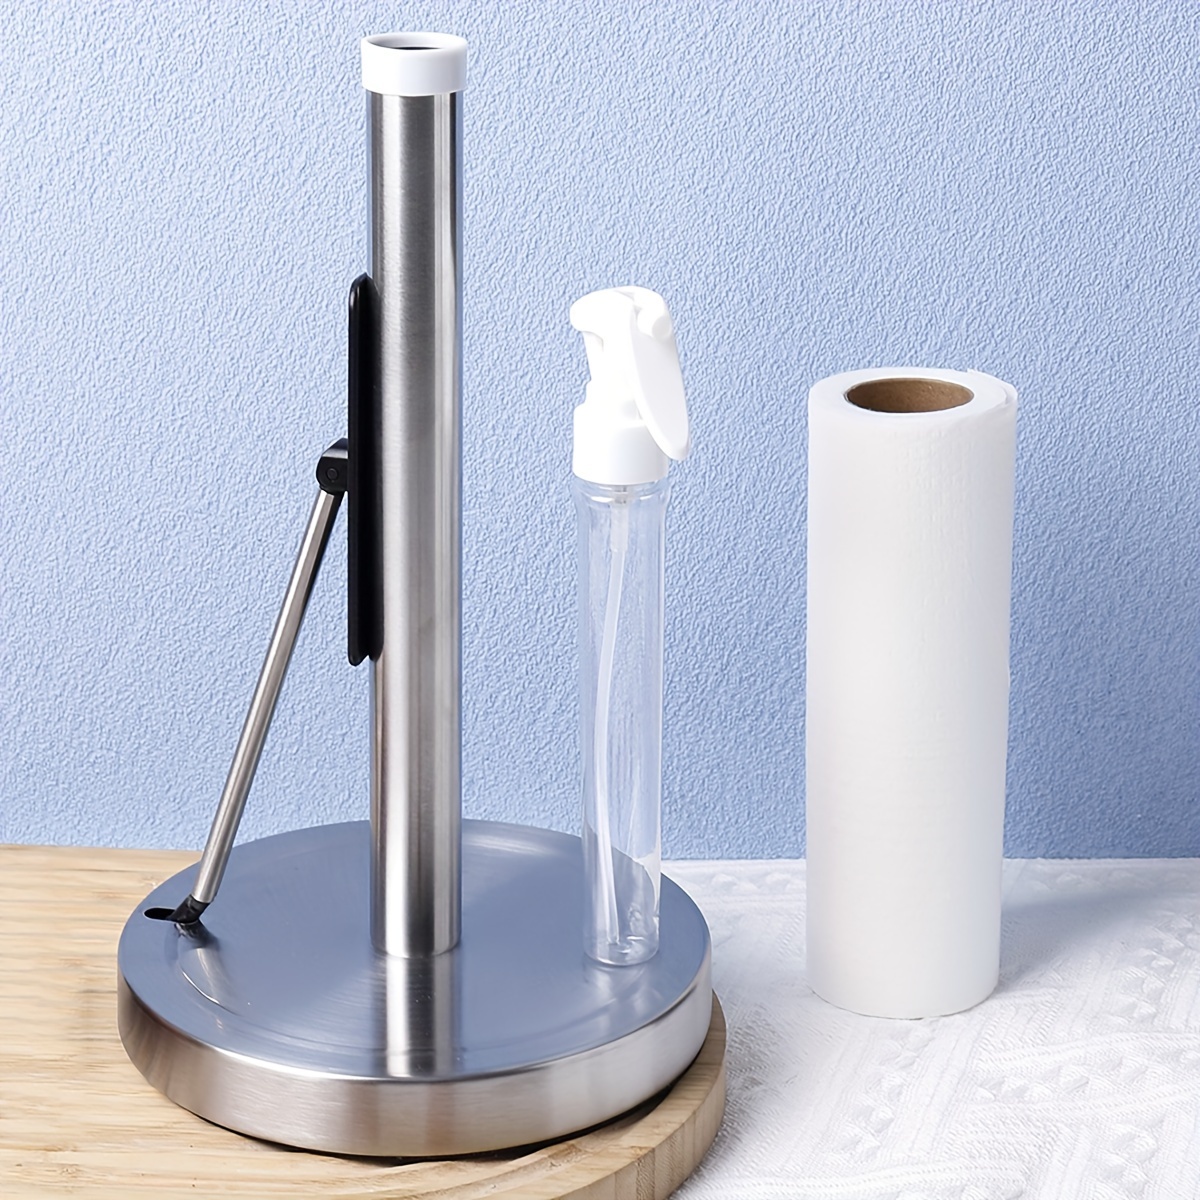 2 in 1 Tabletop Paper Towel Holder with Spray Bottle